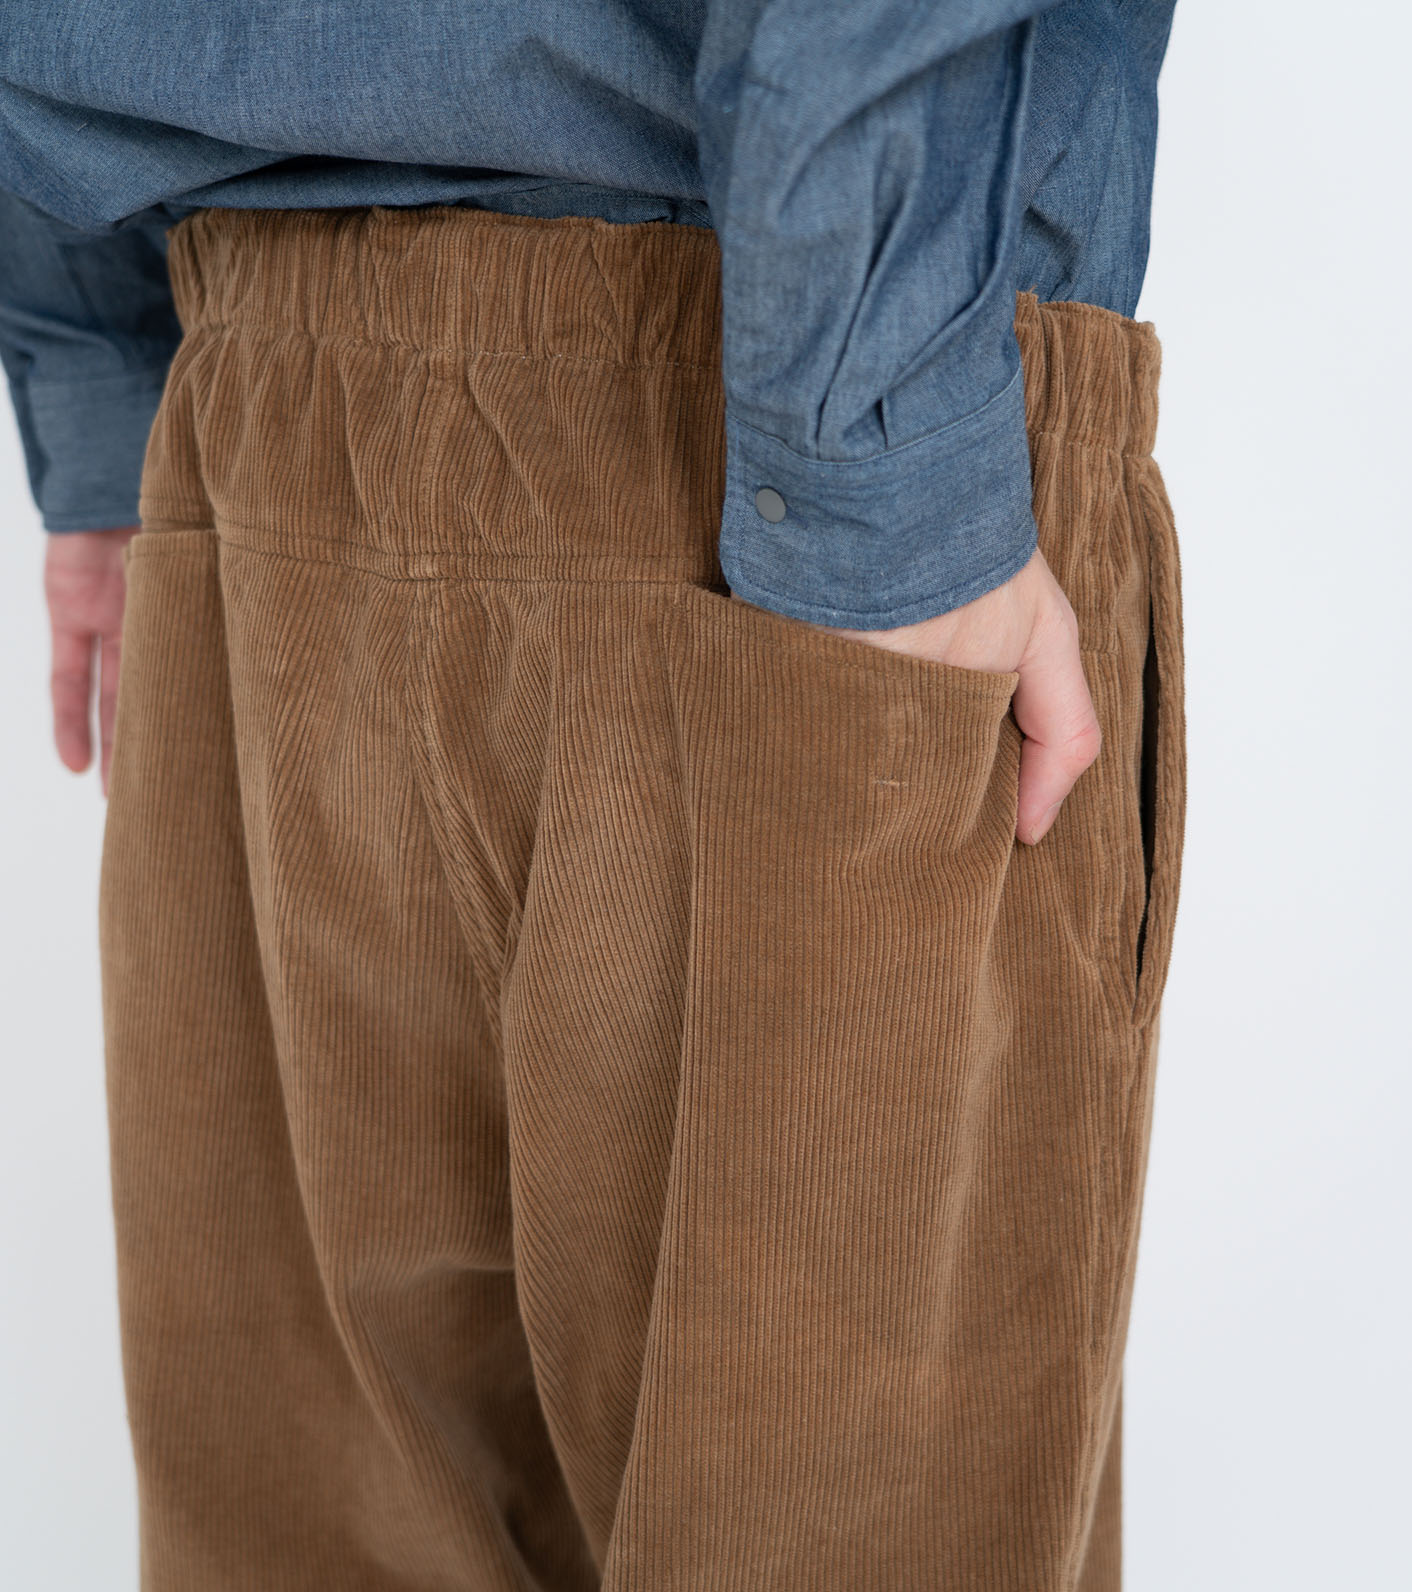 【REMI RELIEF/レミレリーフ】Corduroy Pants